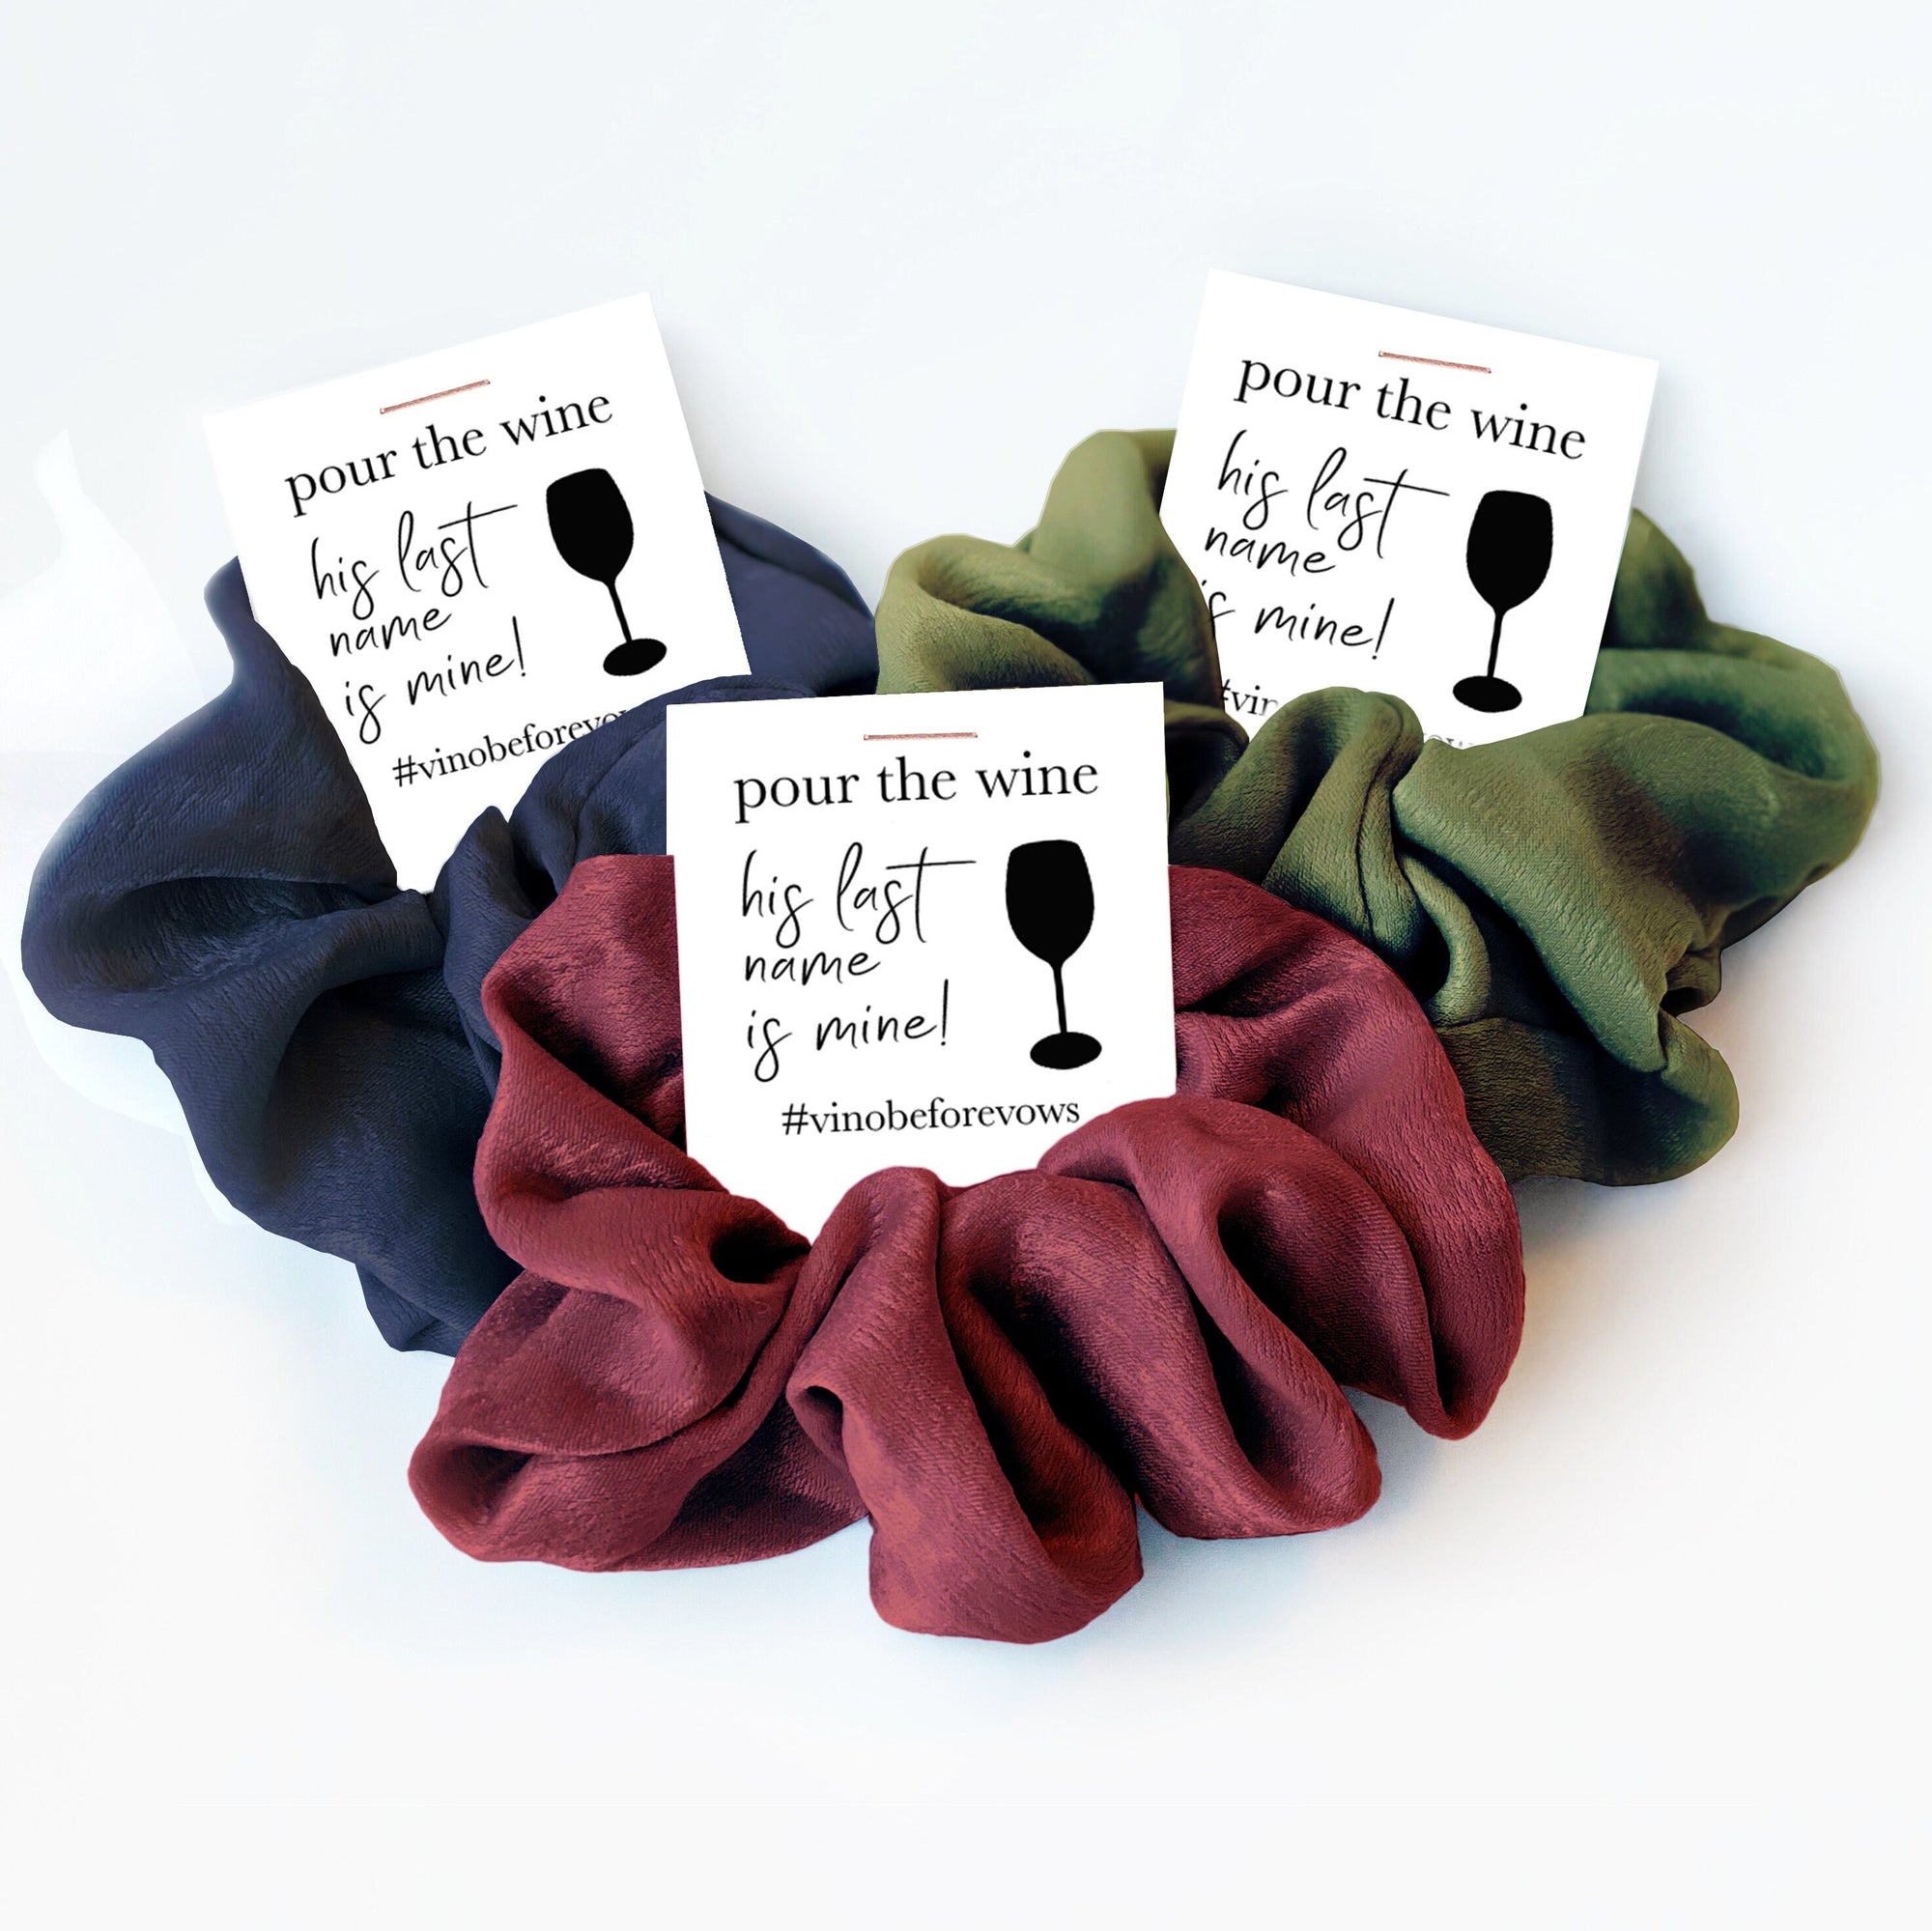 Winery Bachelorette Party Favor, Hair Scrunchie Favors, Pour The Wine His Last Name is Mine, Wine Tasting Bachelorette Thank You Guest Gift